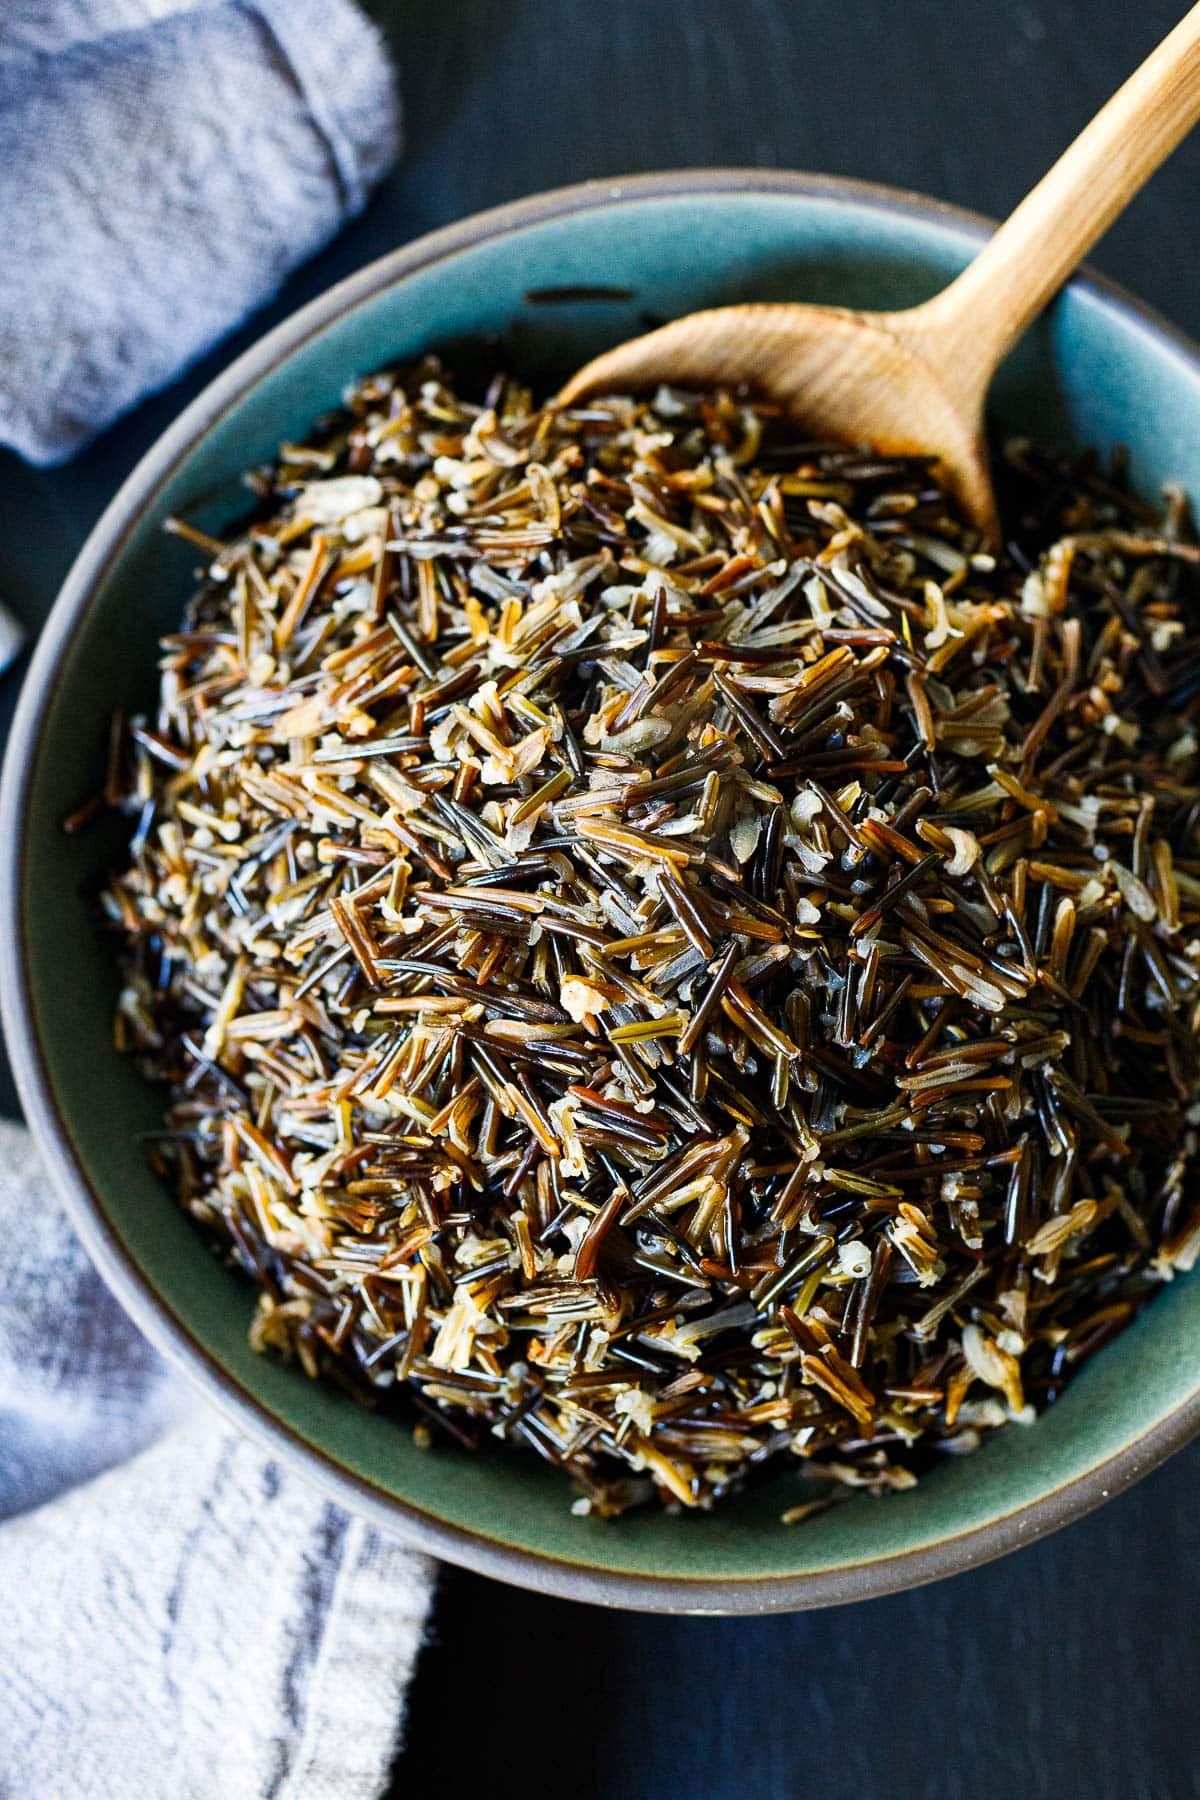 New to wild rice? Here is everything you need to know about this highly nutritious grain; ways to cook it, ways to use it and why it's so good for us! This wild rice recipe is  simple, tasty and nutritious. Vegan, Gluten-free. 